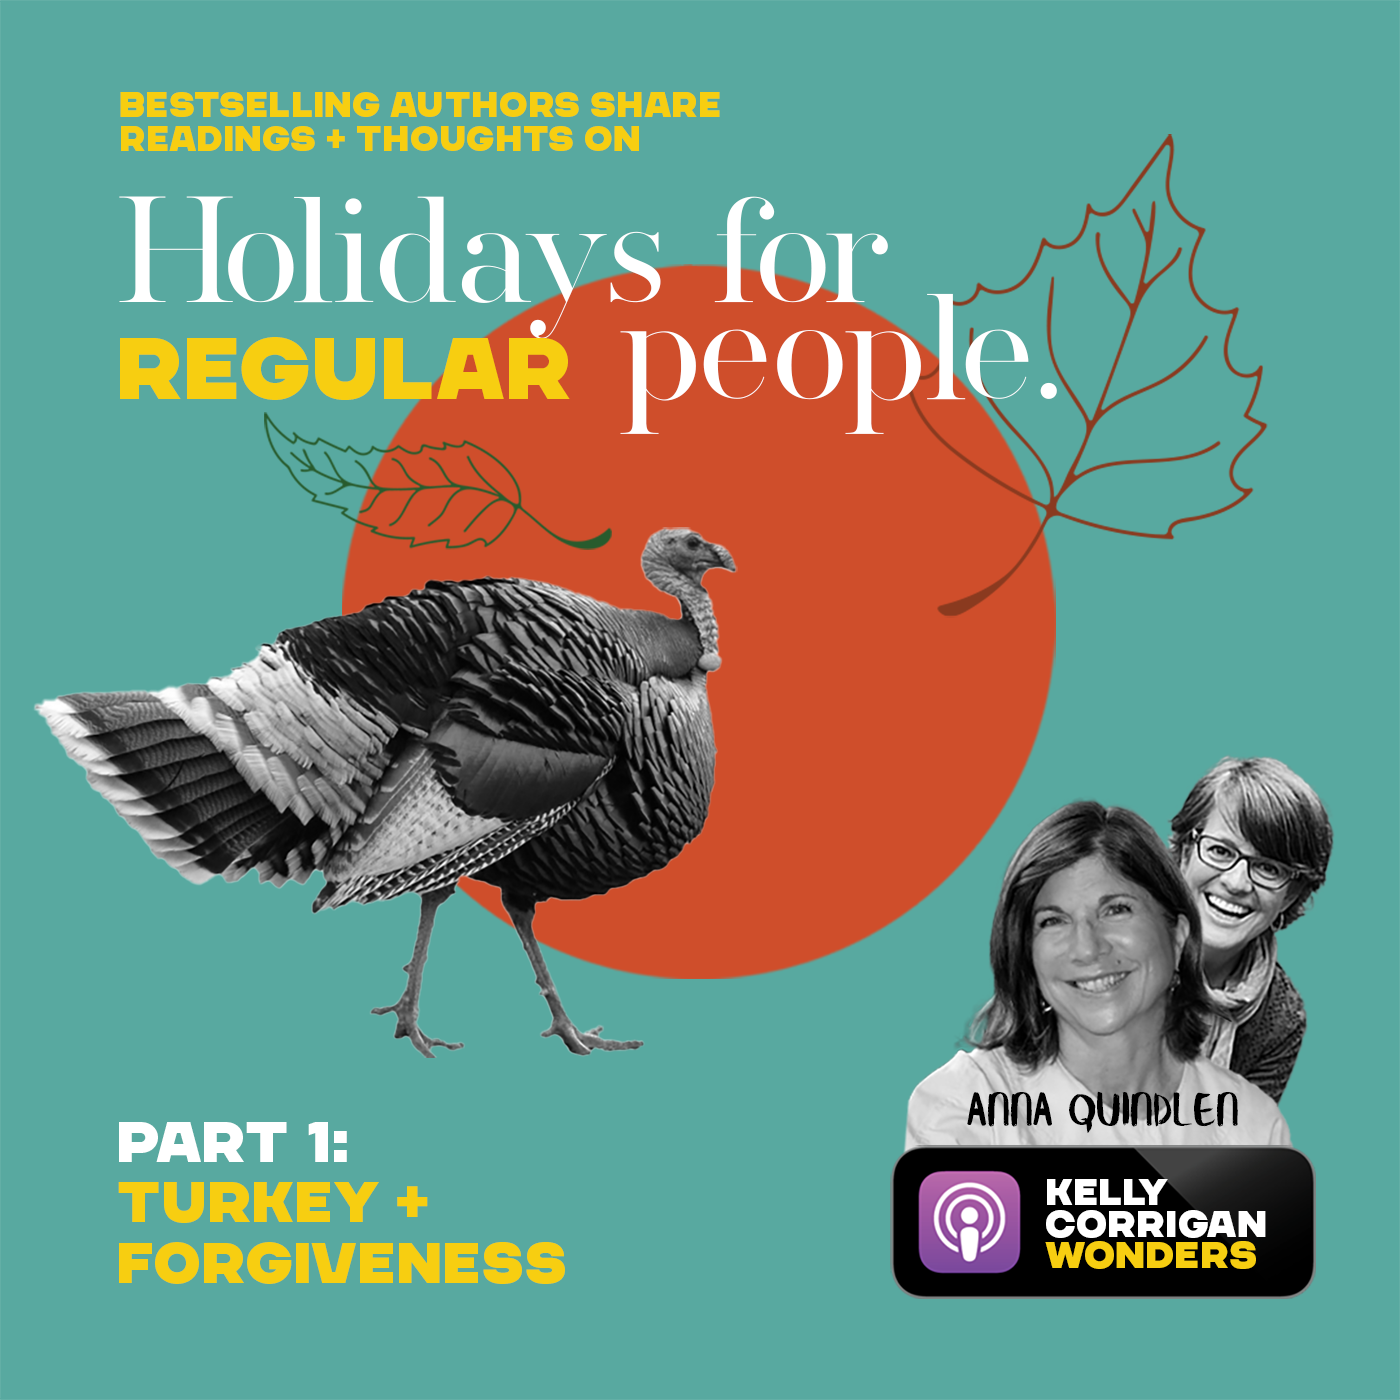 On Turkey and Forgiveness with Anna Quindlen